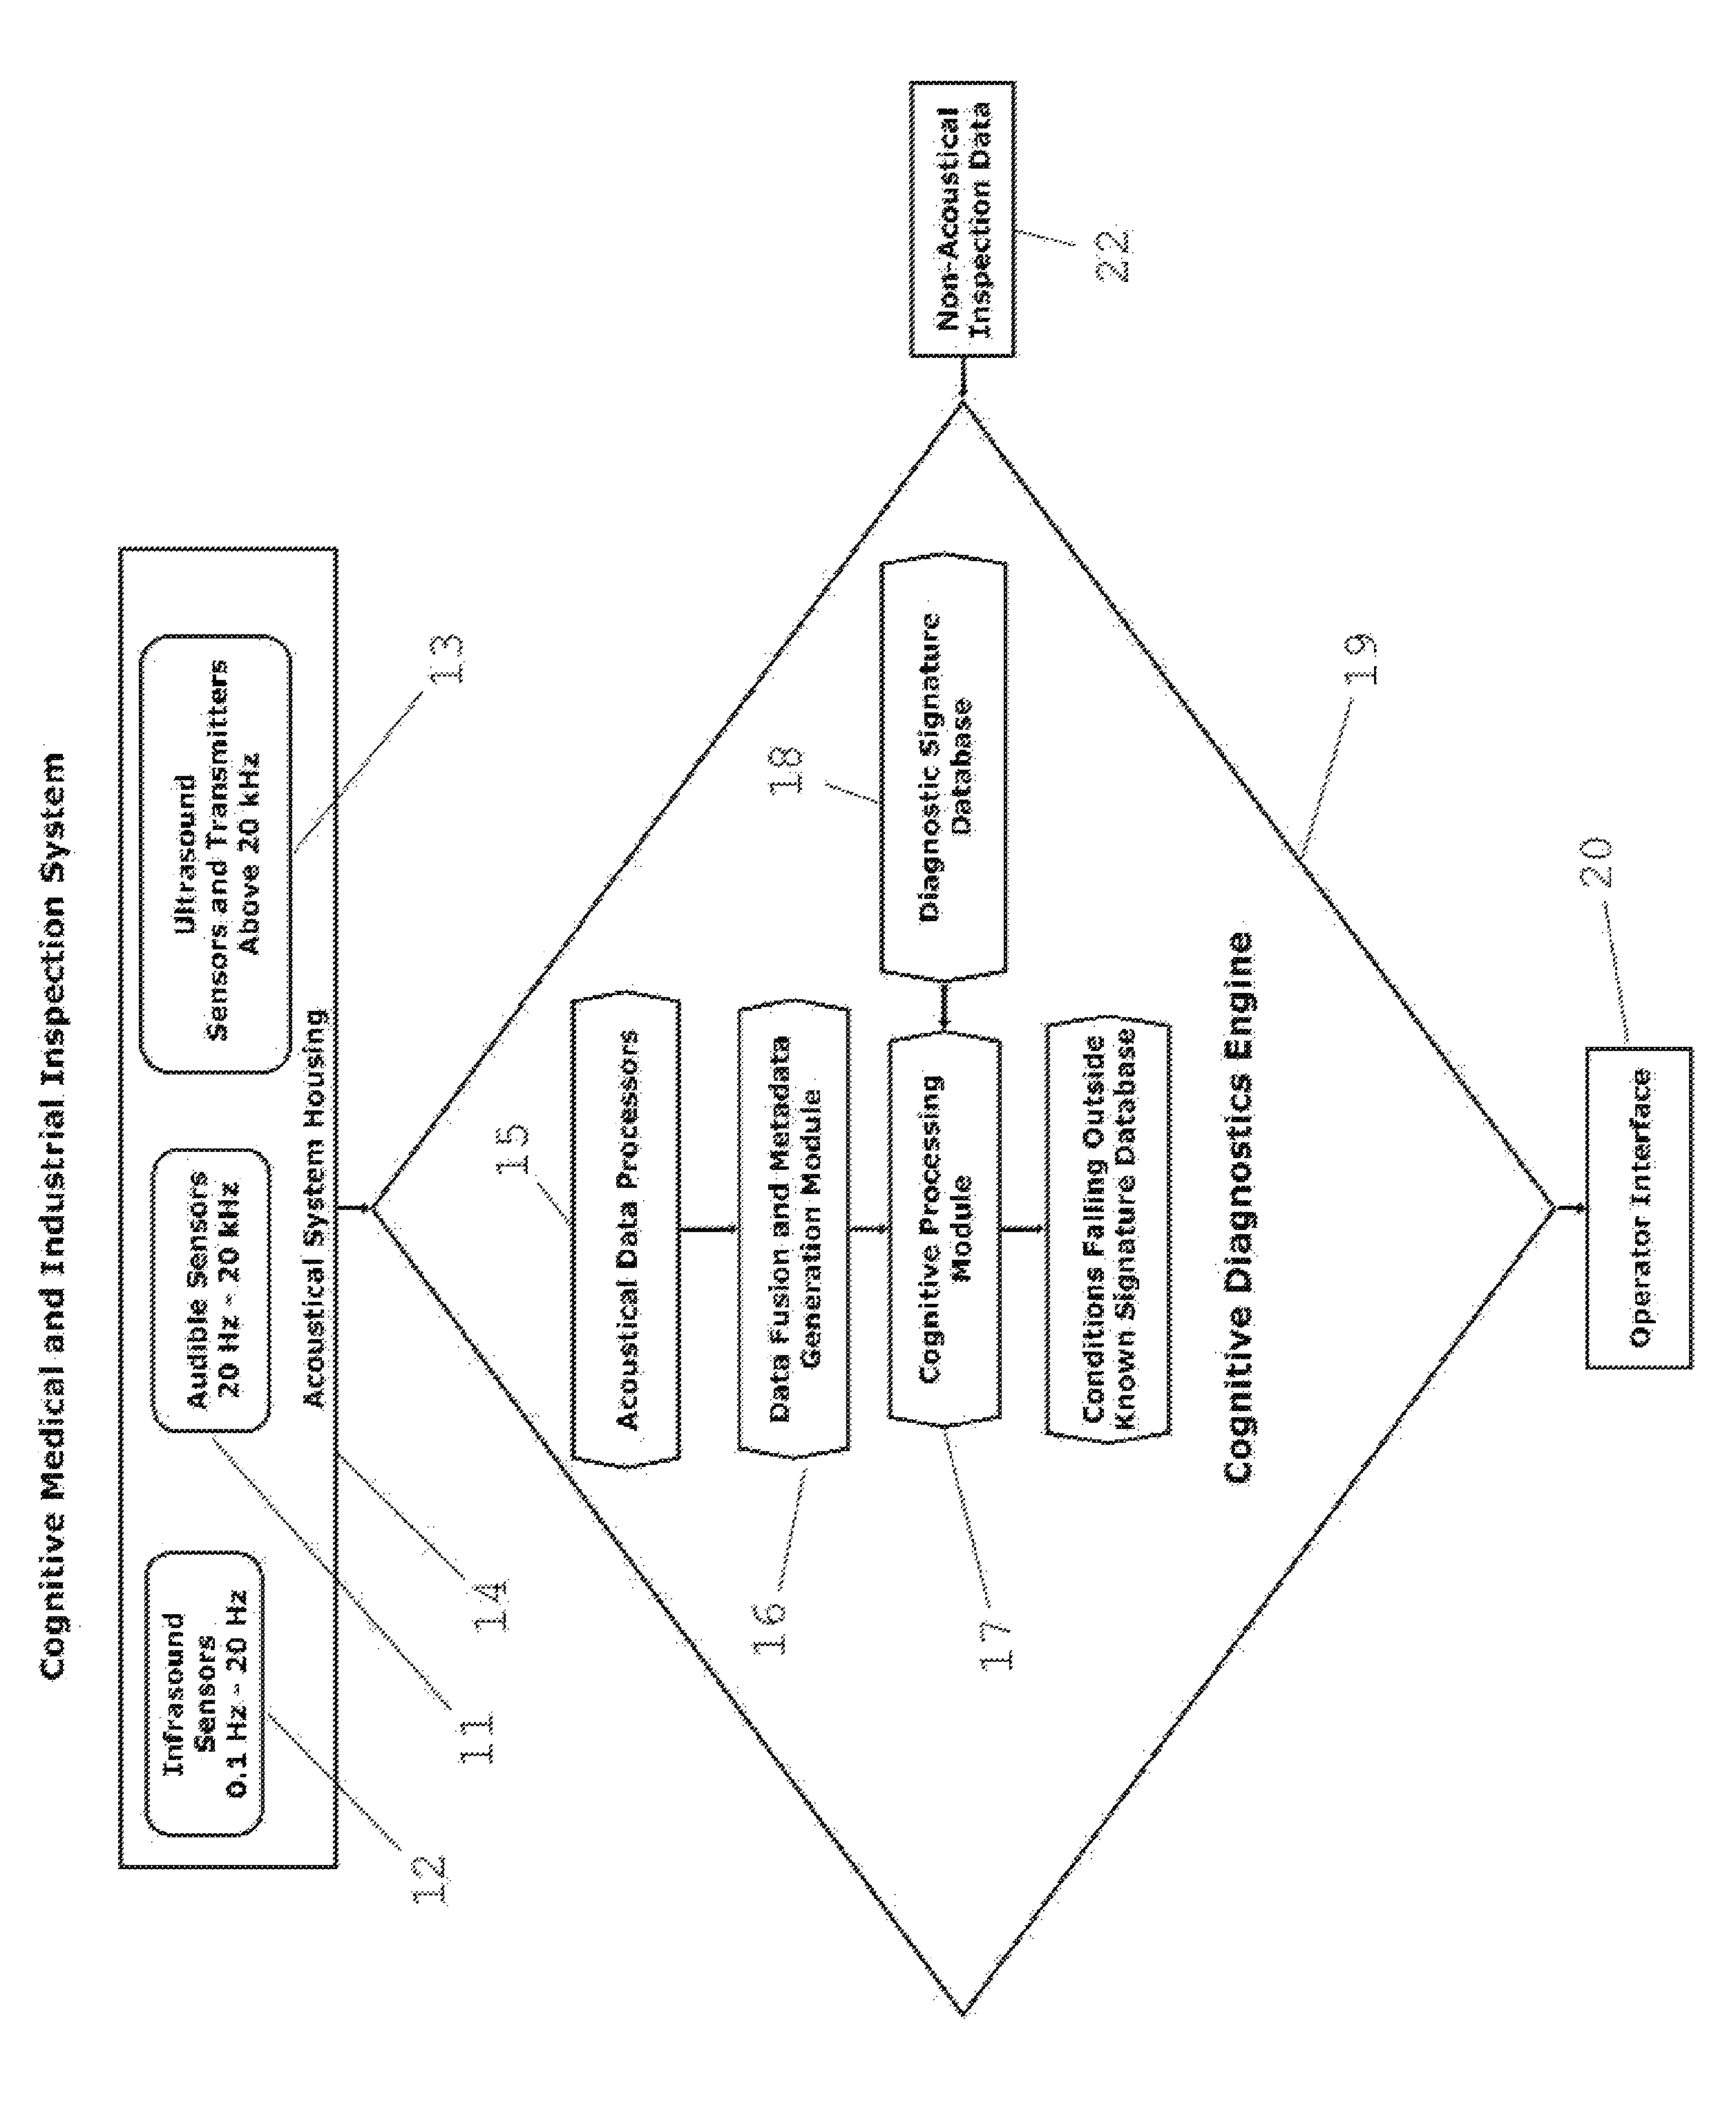 Cognitive medical and industrial inspection system and method